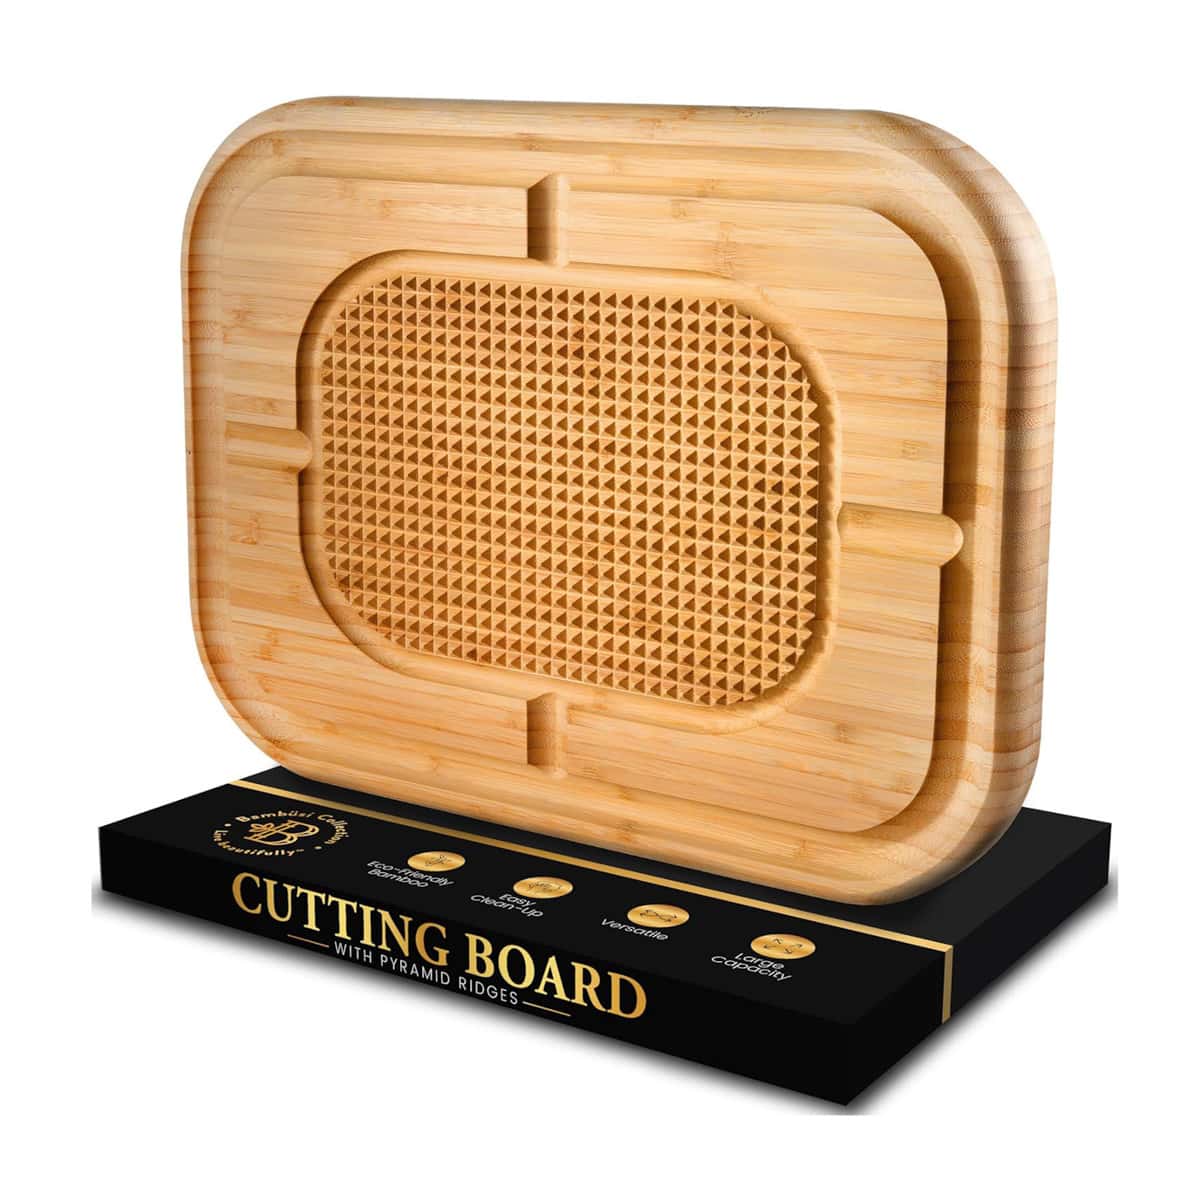 Carving board.